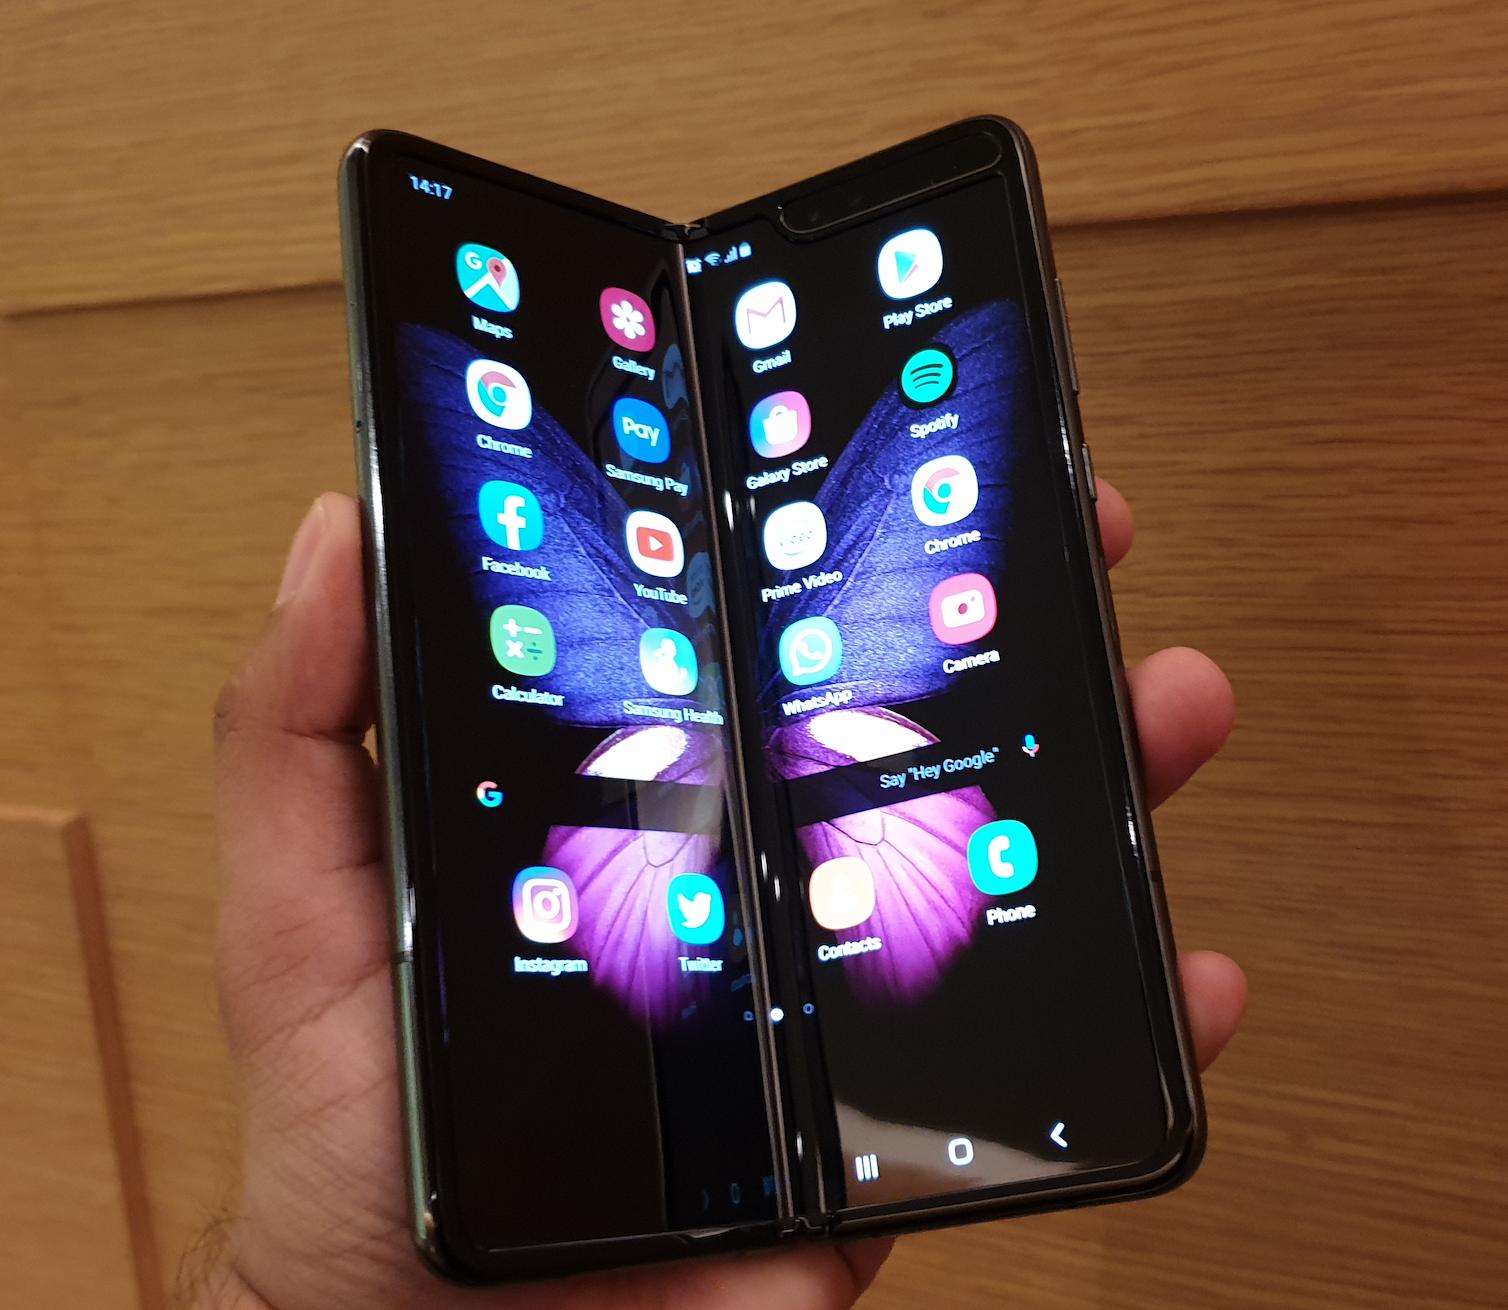 Worldâ€™s first foldable smartphone, Samsung Galaxy Fold, launches in